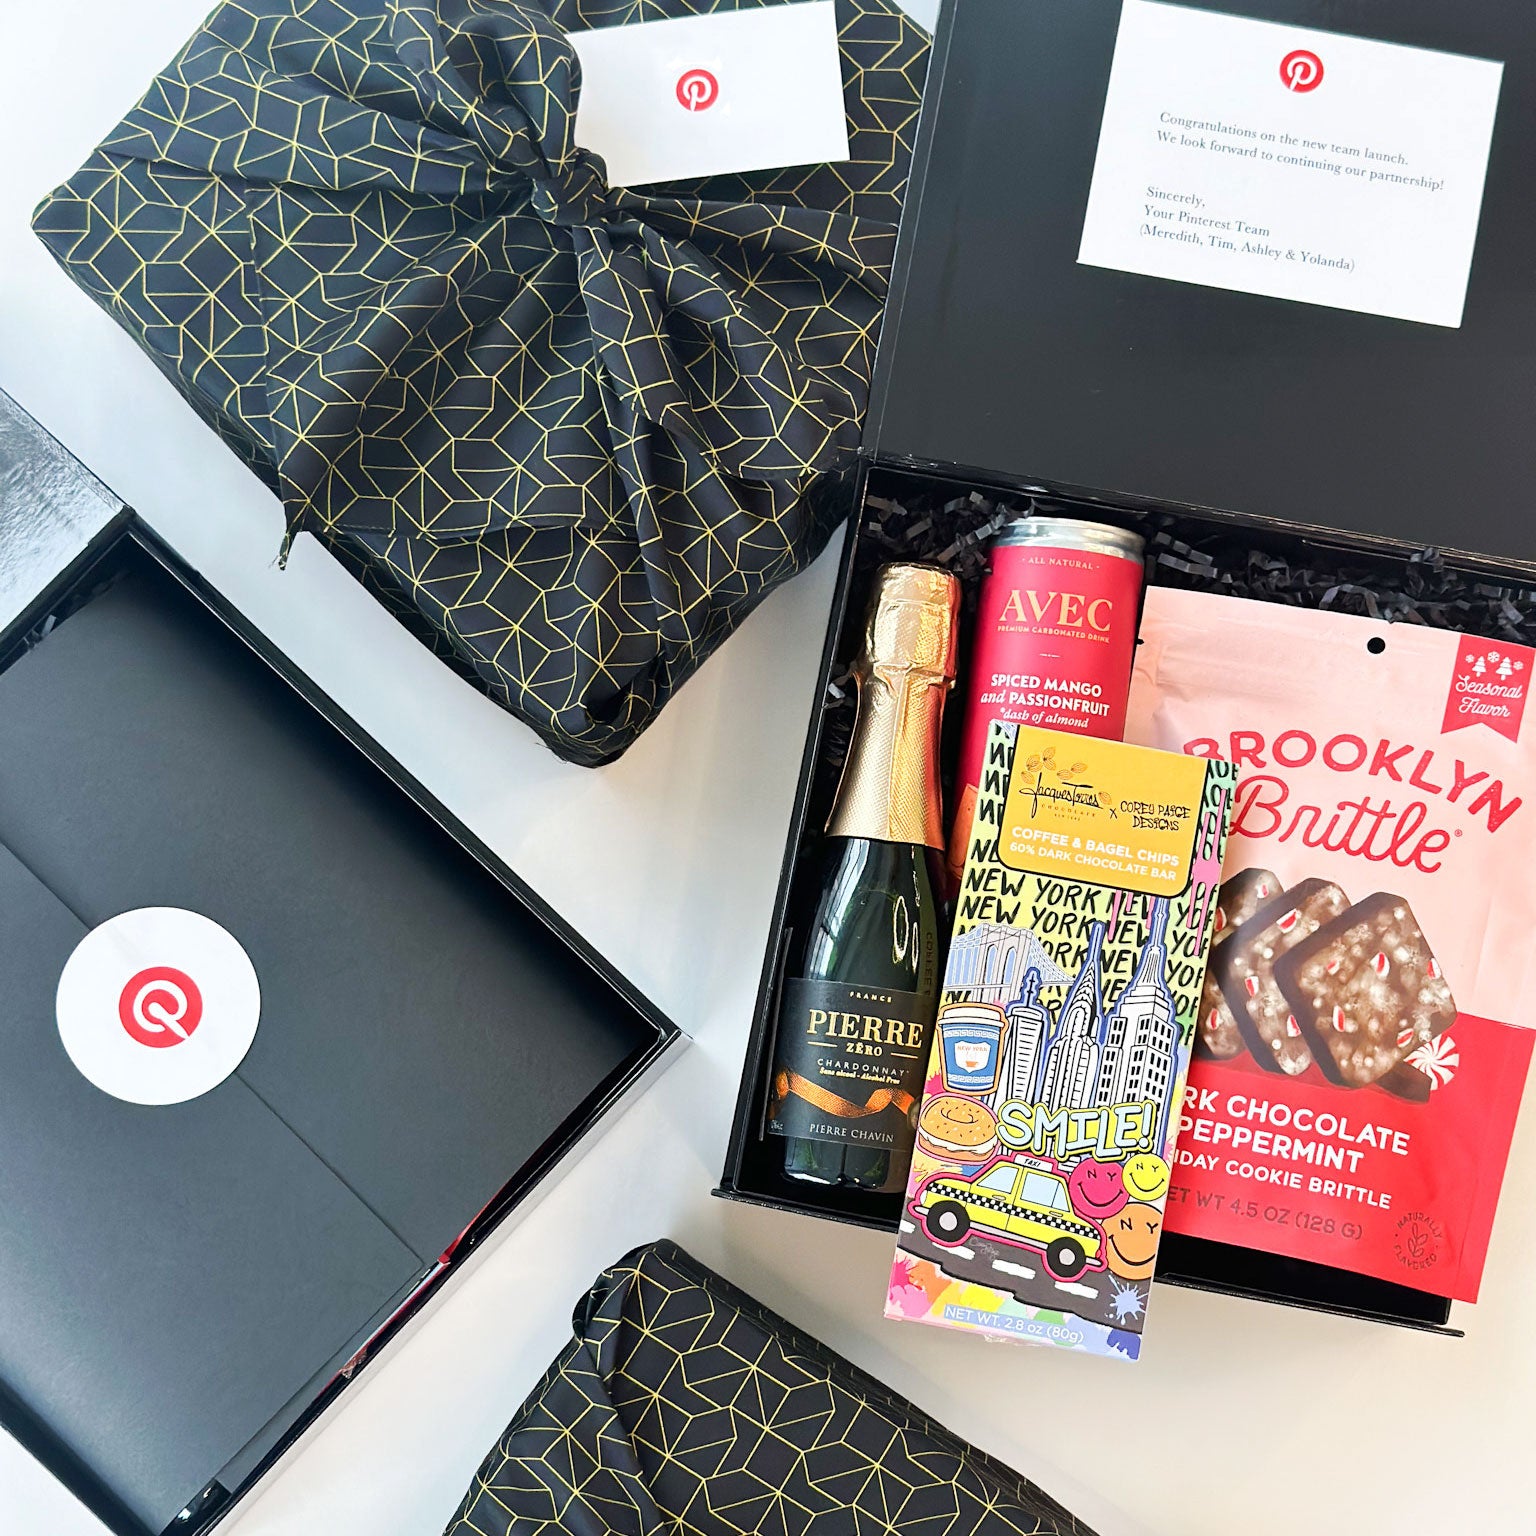 pinterest custom congratulations corporate gift box with new york city chocolate bar, brooklyn brittle, avec drink, pierre chavin zero and more